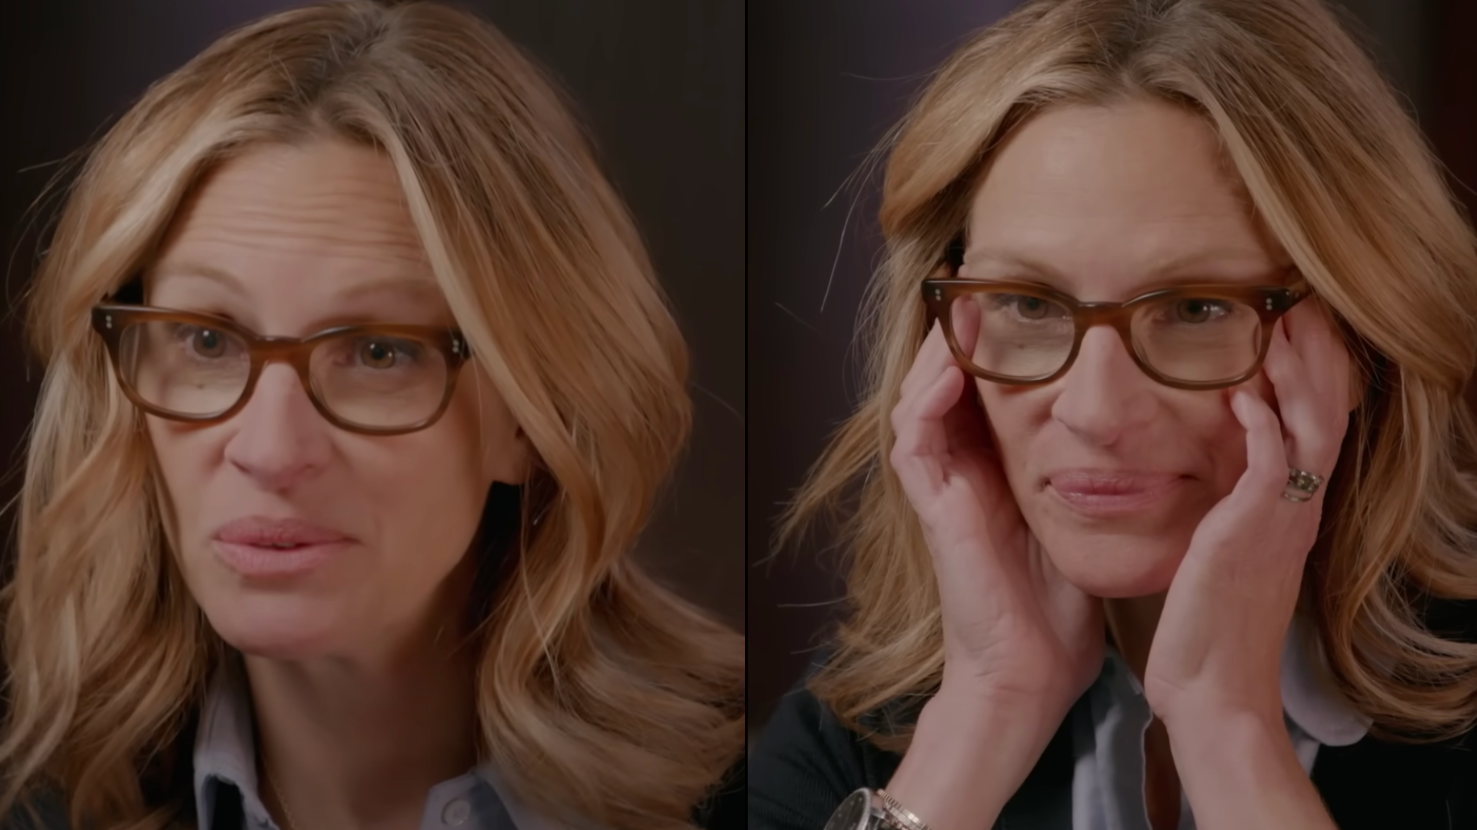 Julia Roberts' reaction when she finds out her real surname: But